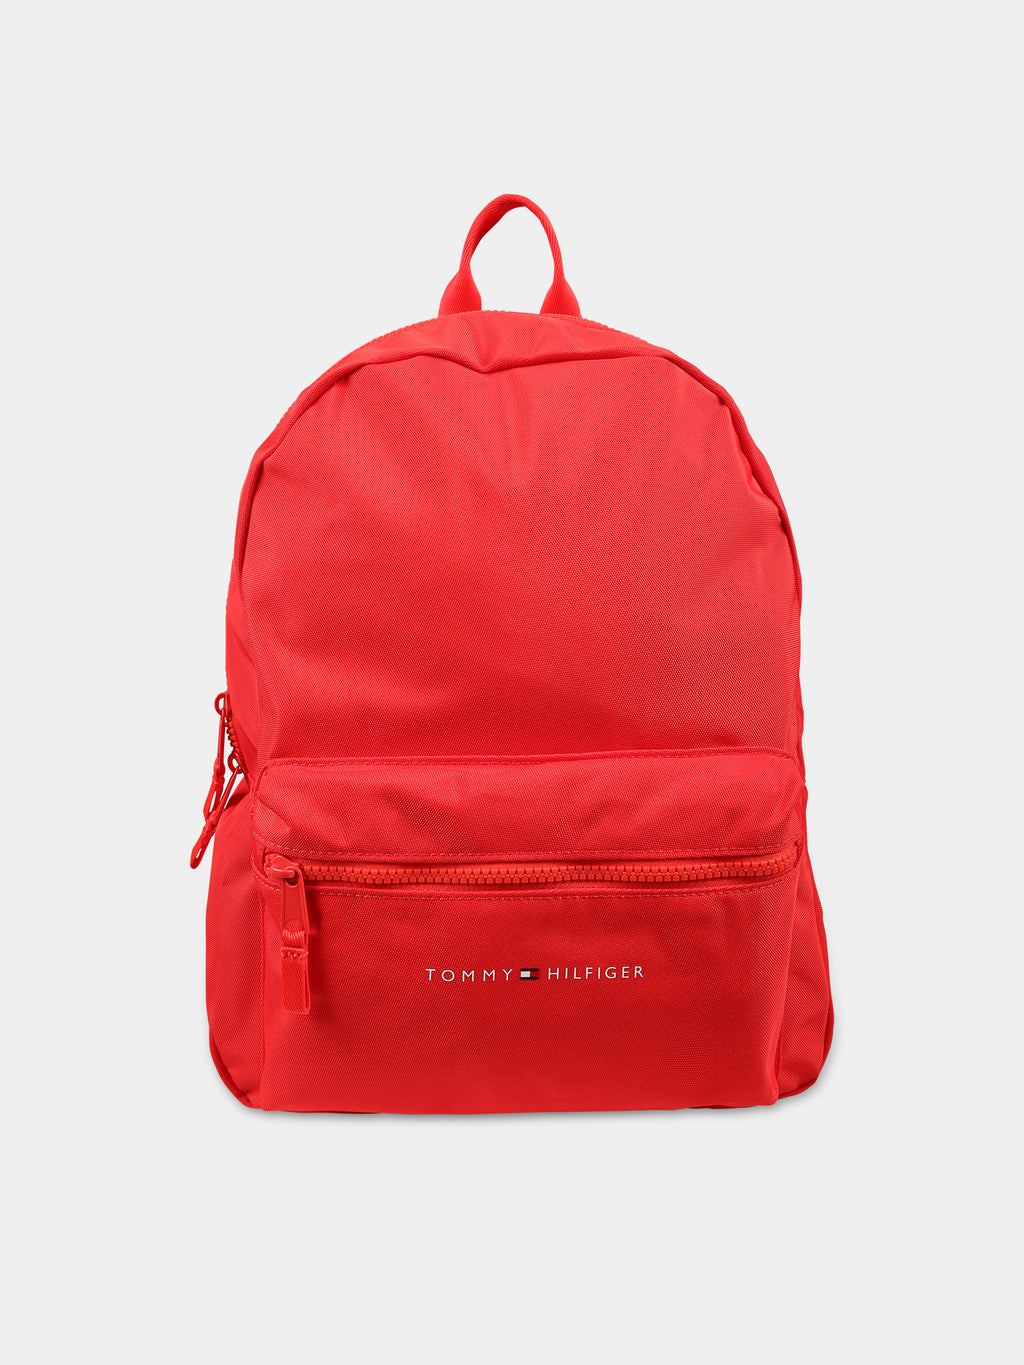 Red backpack for kids with logo